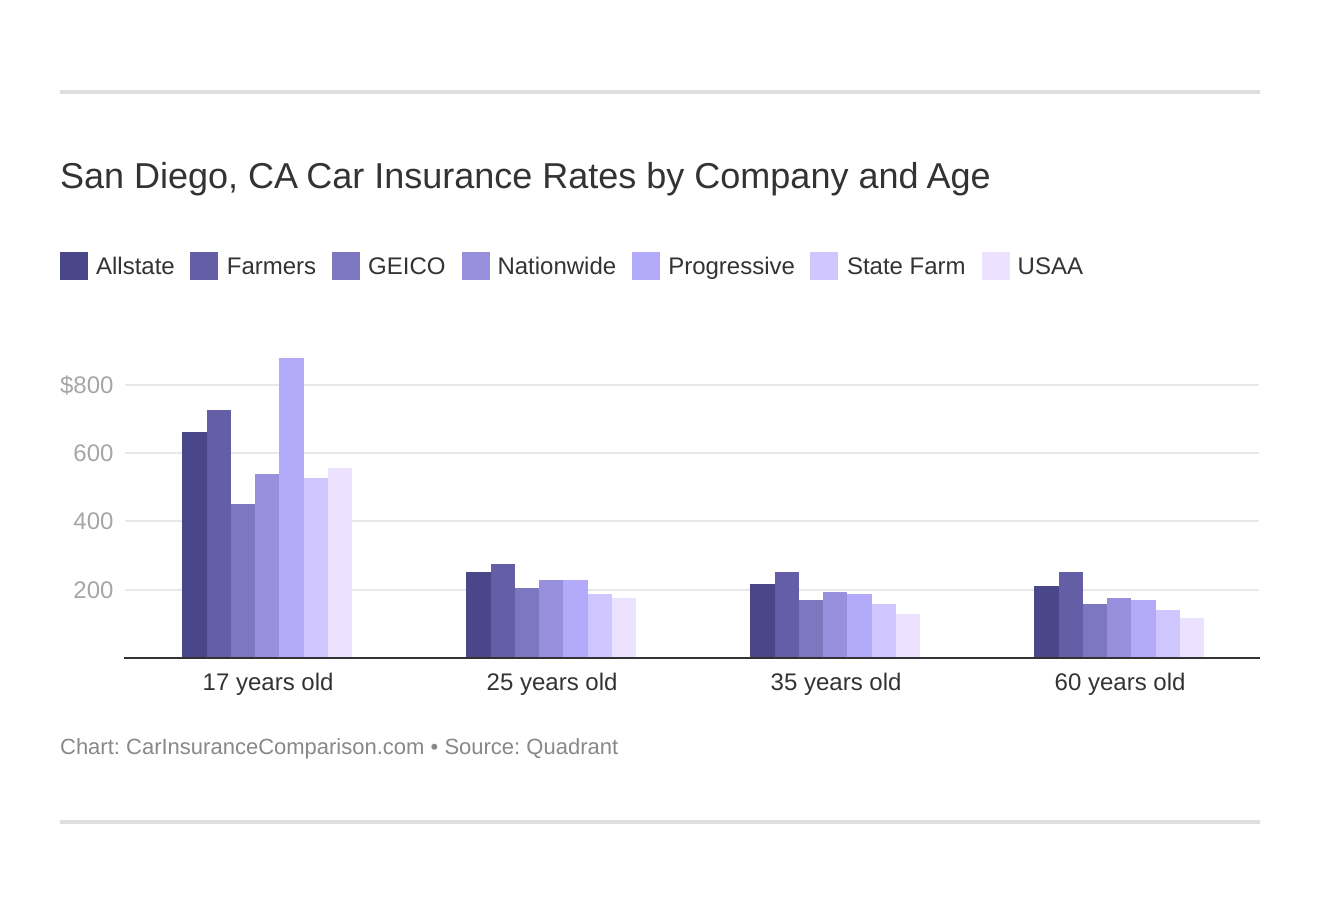 San Diego, CA Car Insurance Rates by Company and Age